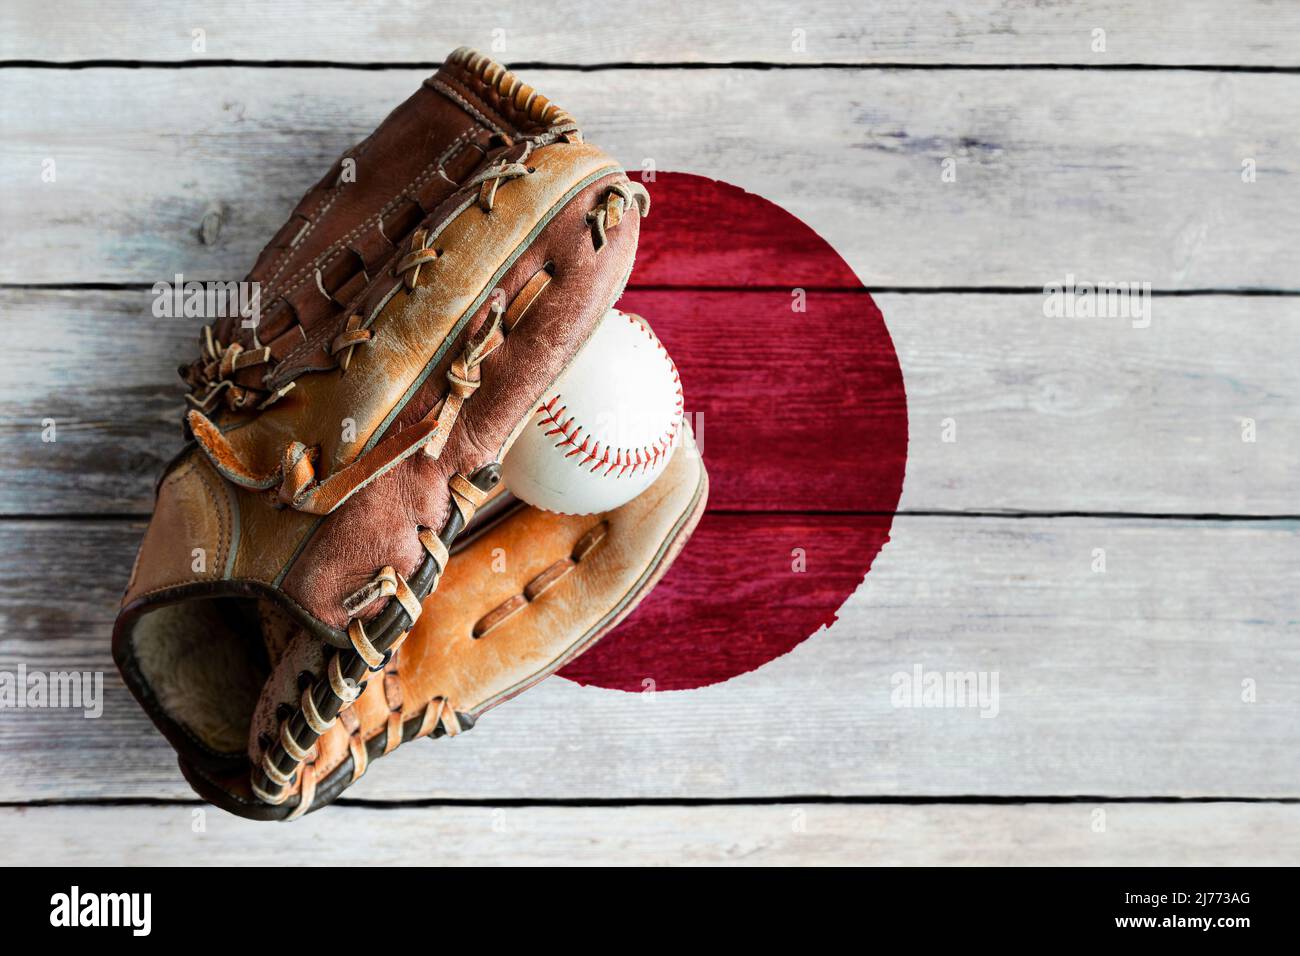 Leather baseball glove with ball on rustic wooden background with painted Japanese flag and copy space. Japan is one of the world's top baseball natio Stock Photo